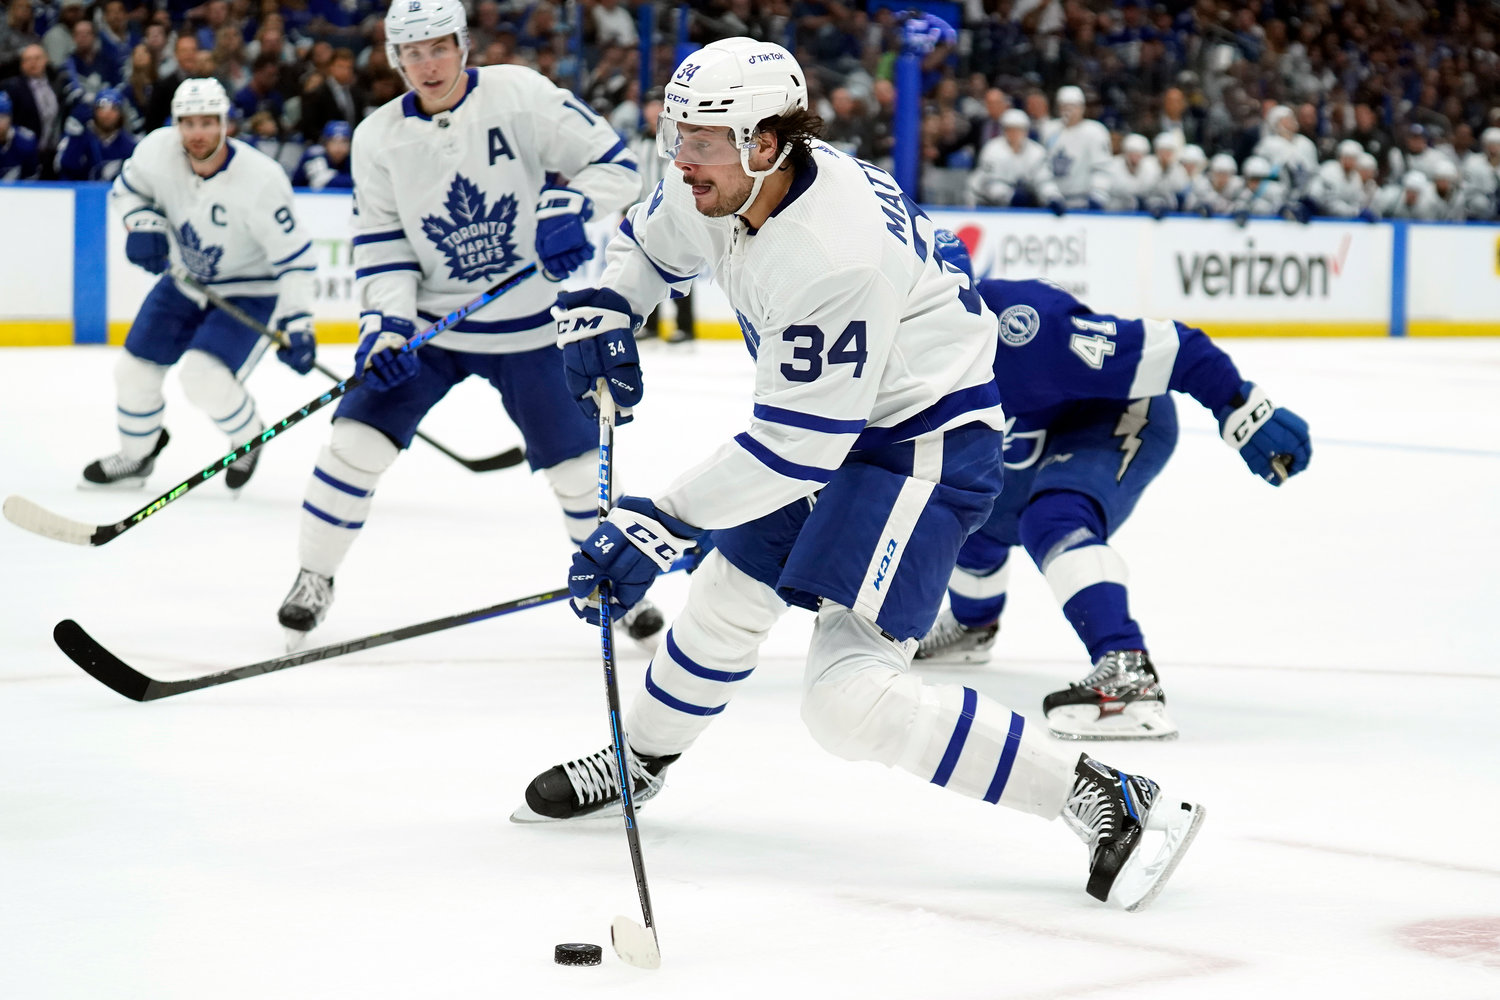 In this file photo, Toronto Maple Leafs center Auston Matthews (34) gets off a shot against the Tampa Bay Lightning in Game 3 of an NHL hockey first-round playoff series Friday, May 6, 2022, in Tampa, Fla. On Tuesday night,  Matthews won the Hart Trophy as the NHL’s most valuable player.